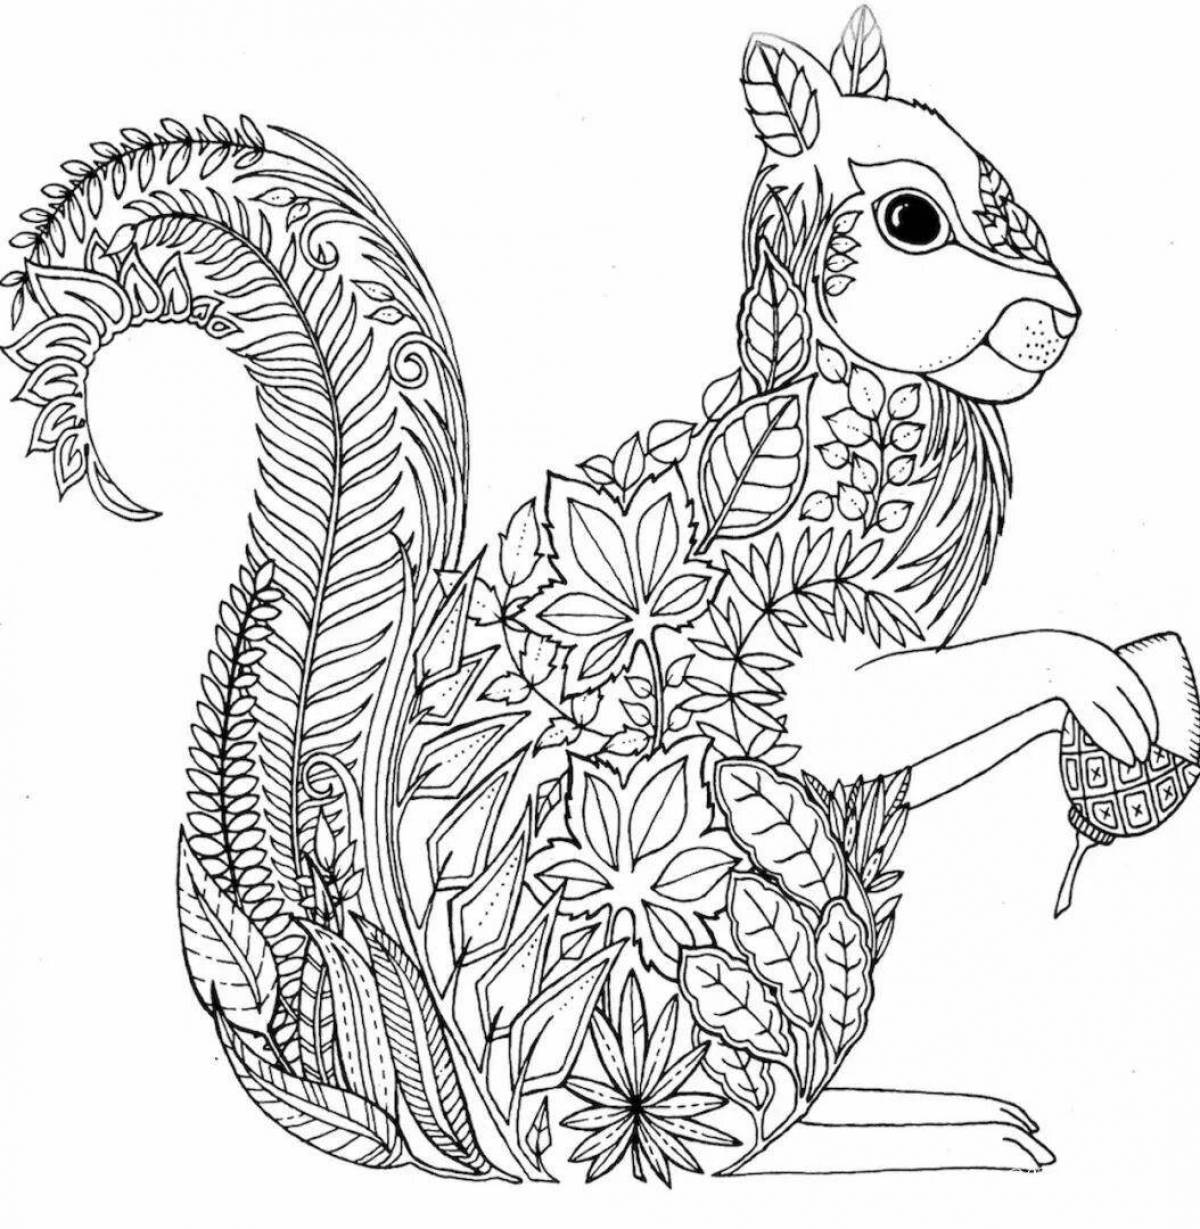 Exquisite antistress animal coloring book for girls